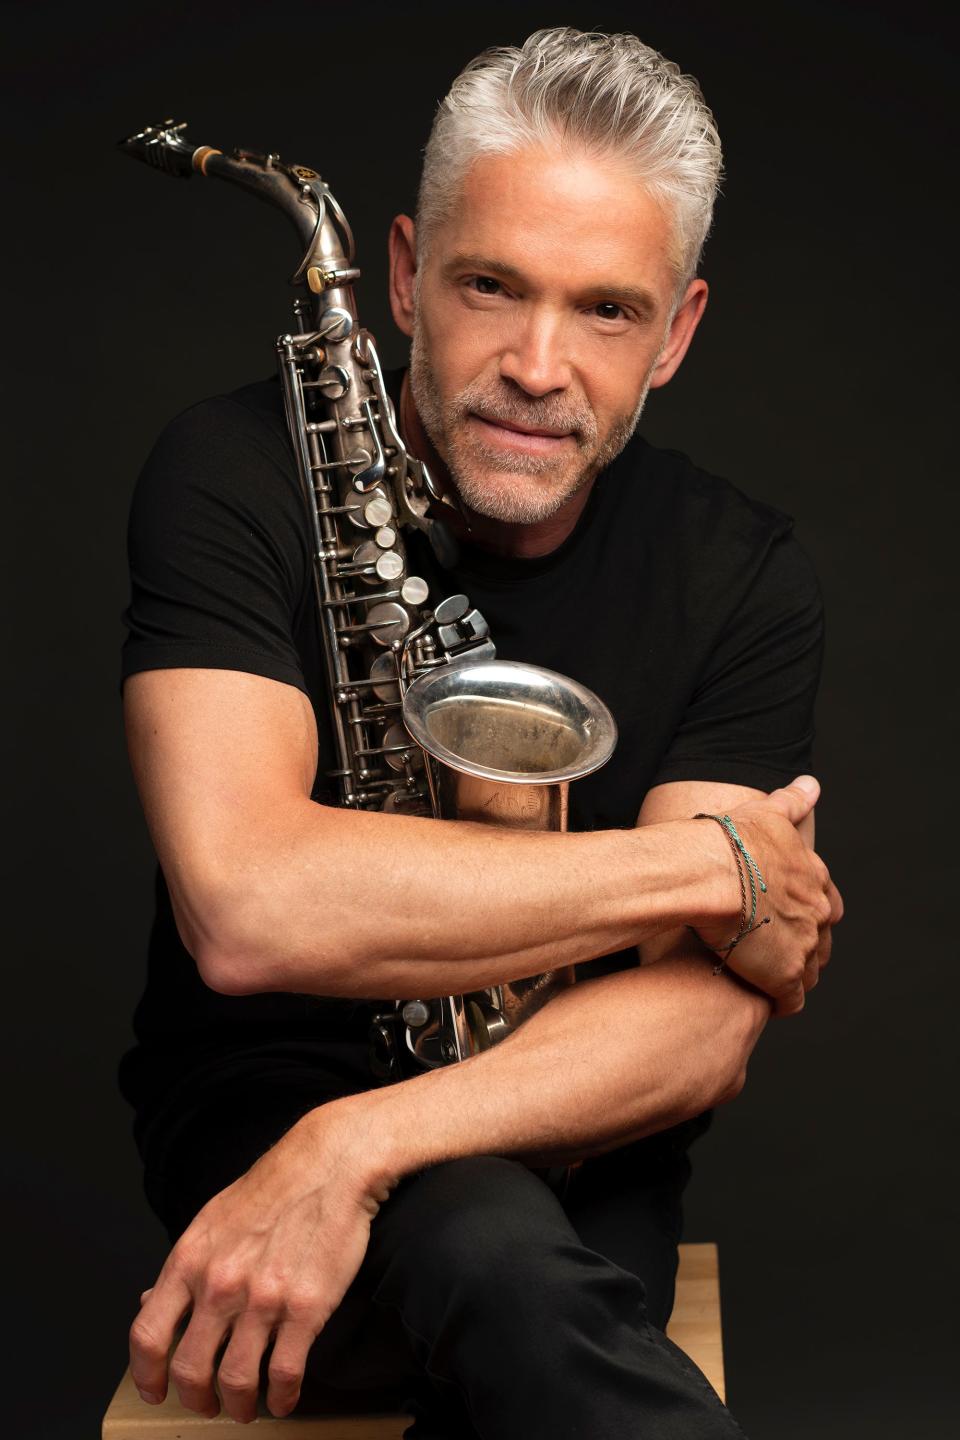 Dave Koz will bring his annual Christmas Show to the Plaza at 7 p.m. Dec. 14.